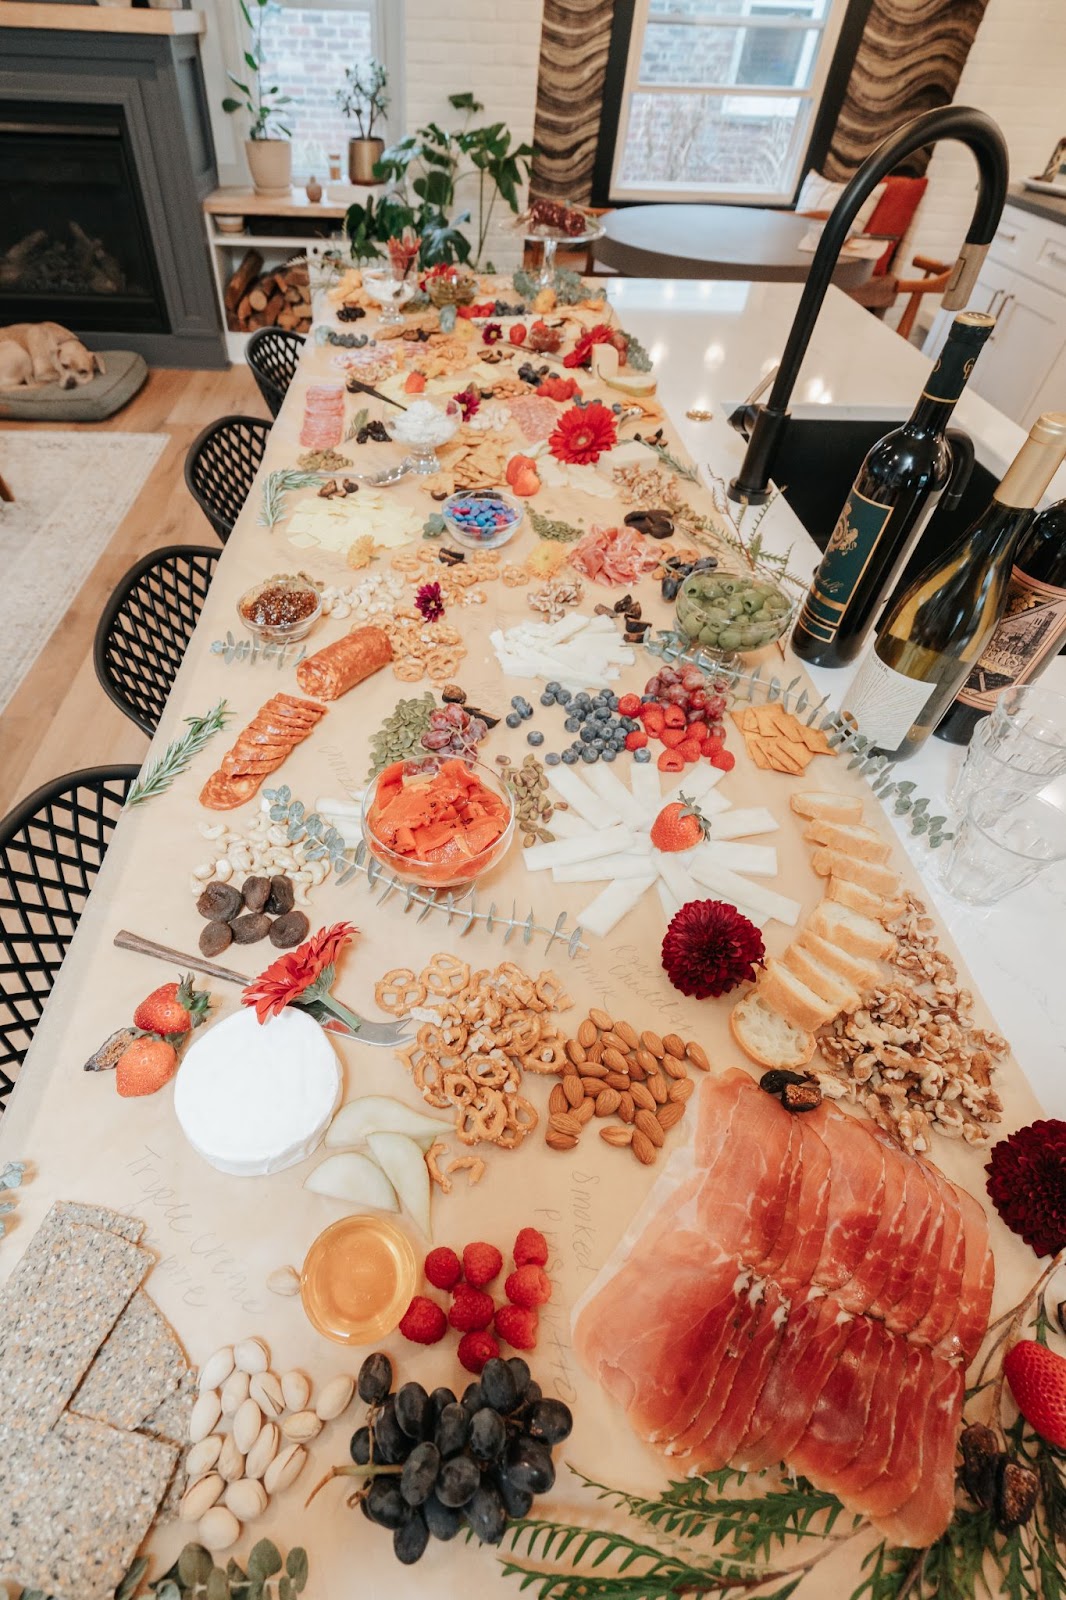 HOW TO MAKE A DAIRY + GLUTEN FREE CHARCUTERIE BOARD FOR THE HOLIDAYS image 8